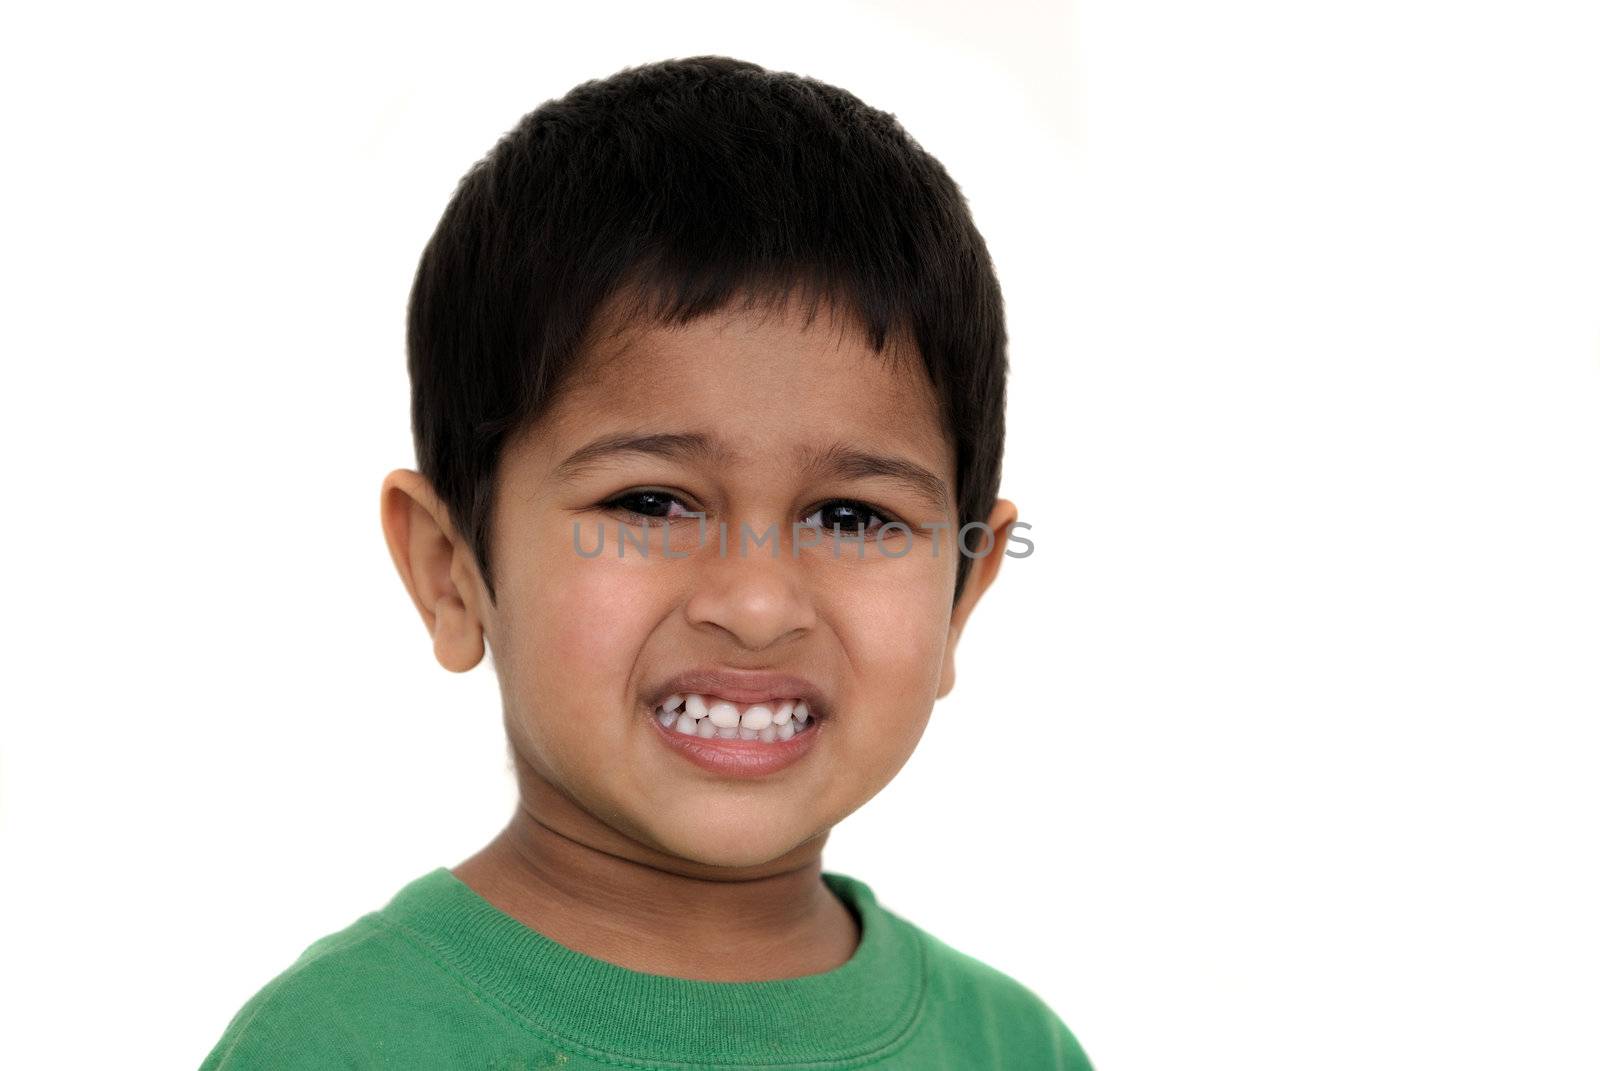 An handsome Indian kid irritated at something